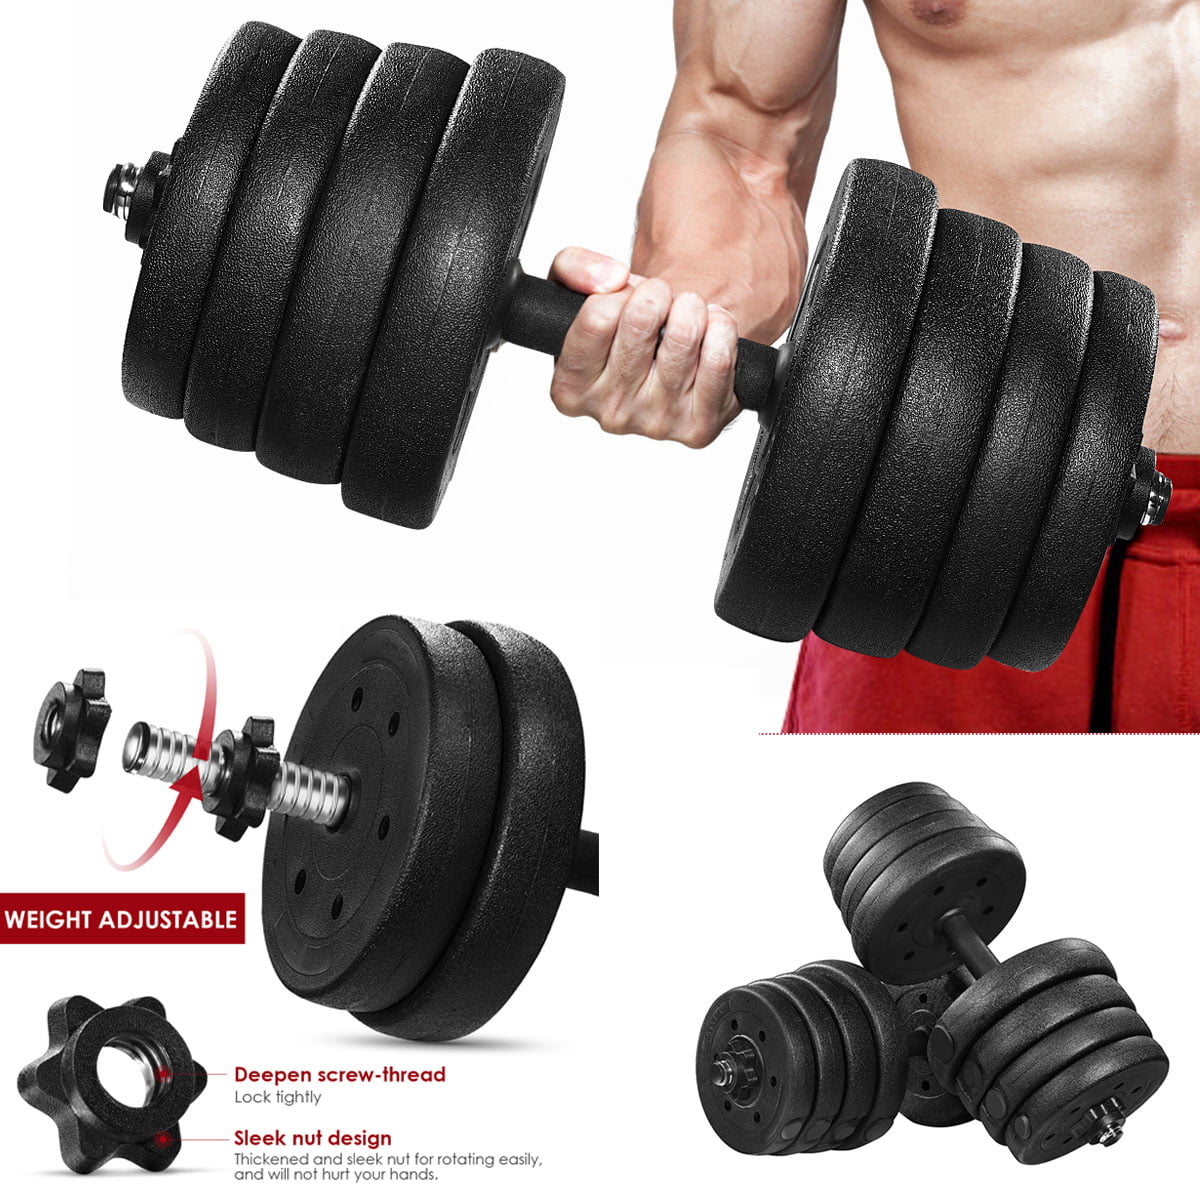 SDHYL Adjustable Dumbbells Set Weights Dumbbells Set Dumbbell Weights Set with Connector Free Weights for Exercises Non-Slip Hand Dumbbell 55/66 lbs 